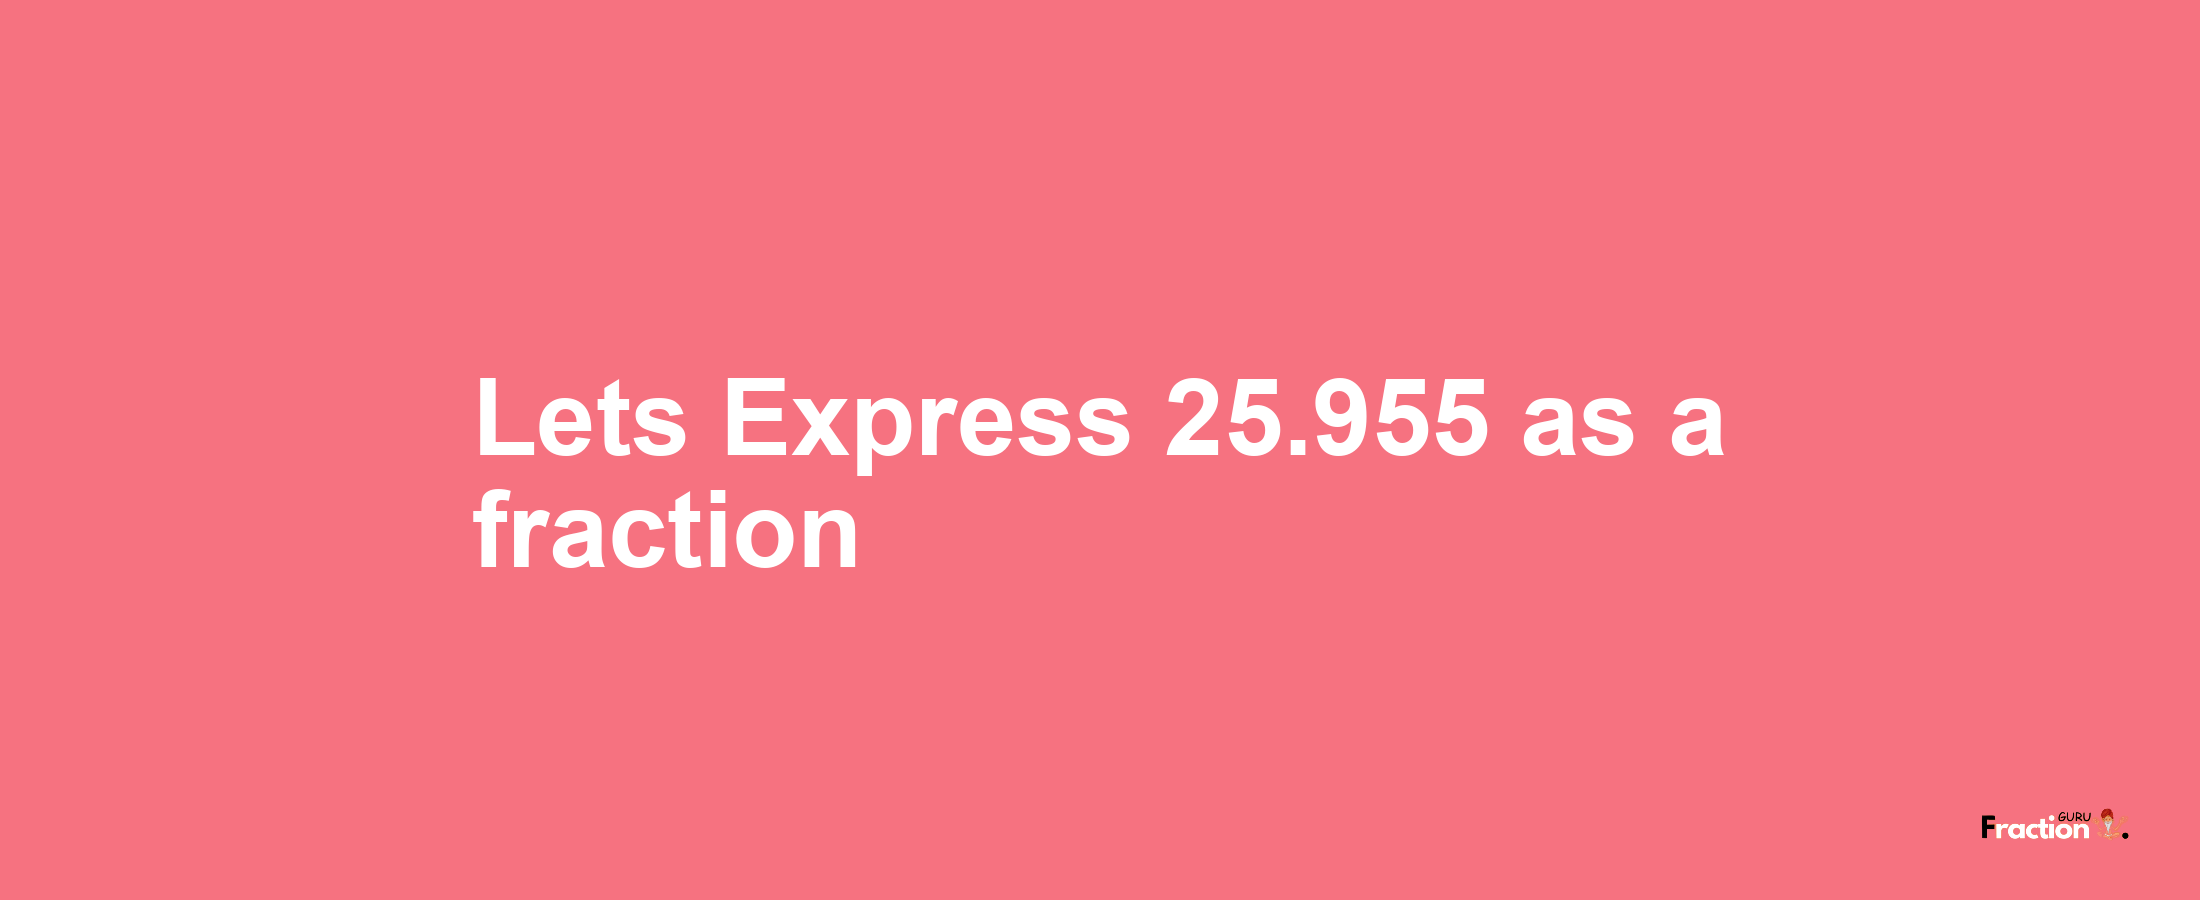 Lets Express 25.955 as afraction